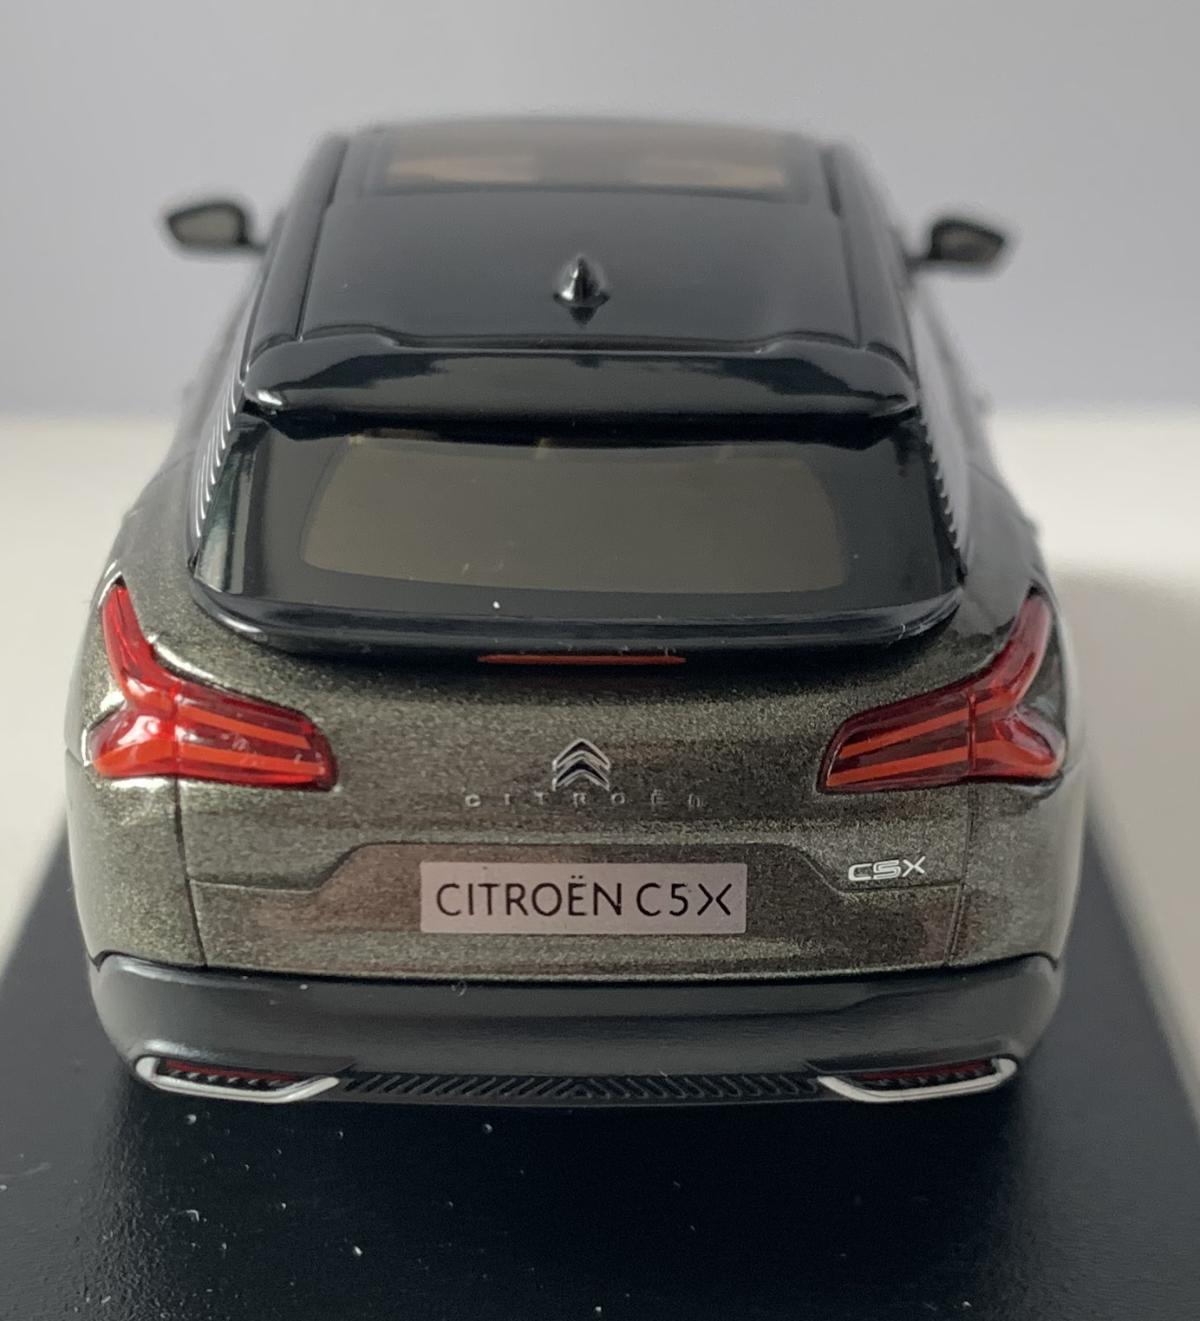 An excellent scale model of a Citroen C5X decorated in amazonite grey with black panoramic roof, rears spoilers, tinted windows, black and silver wheels